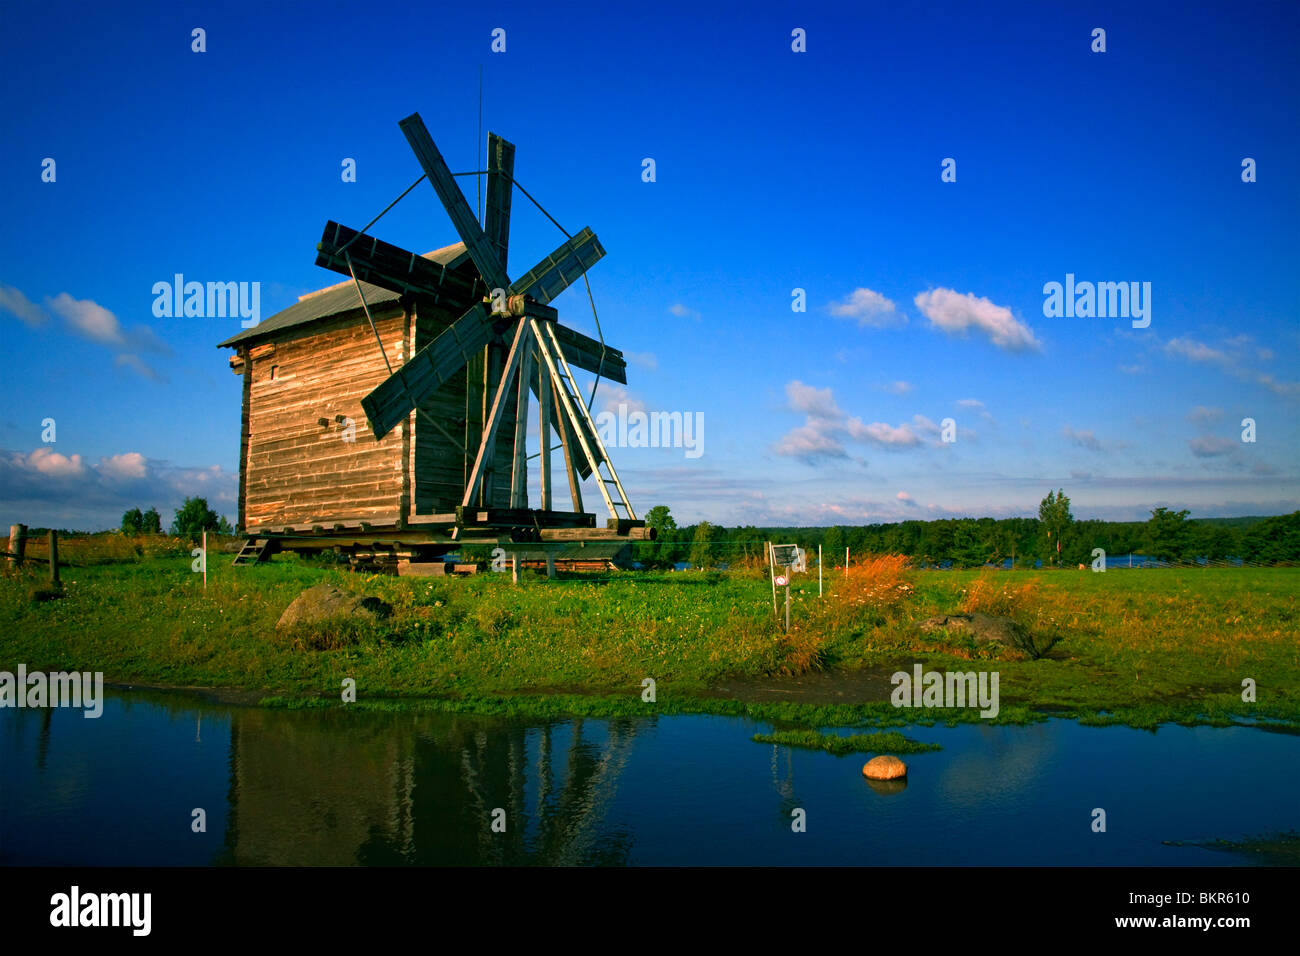 Russia; Karelia; Kizhi Island; A windmill built in the traditional Russian Architectural style on Kizhi Island. Stock Photo